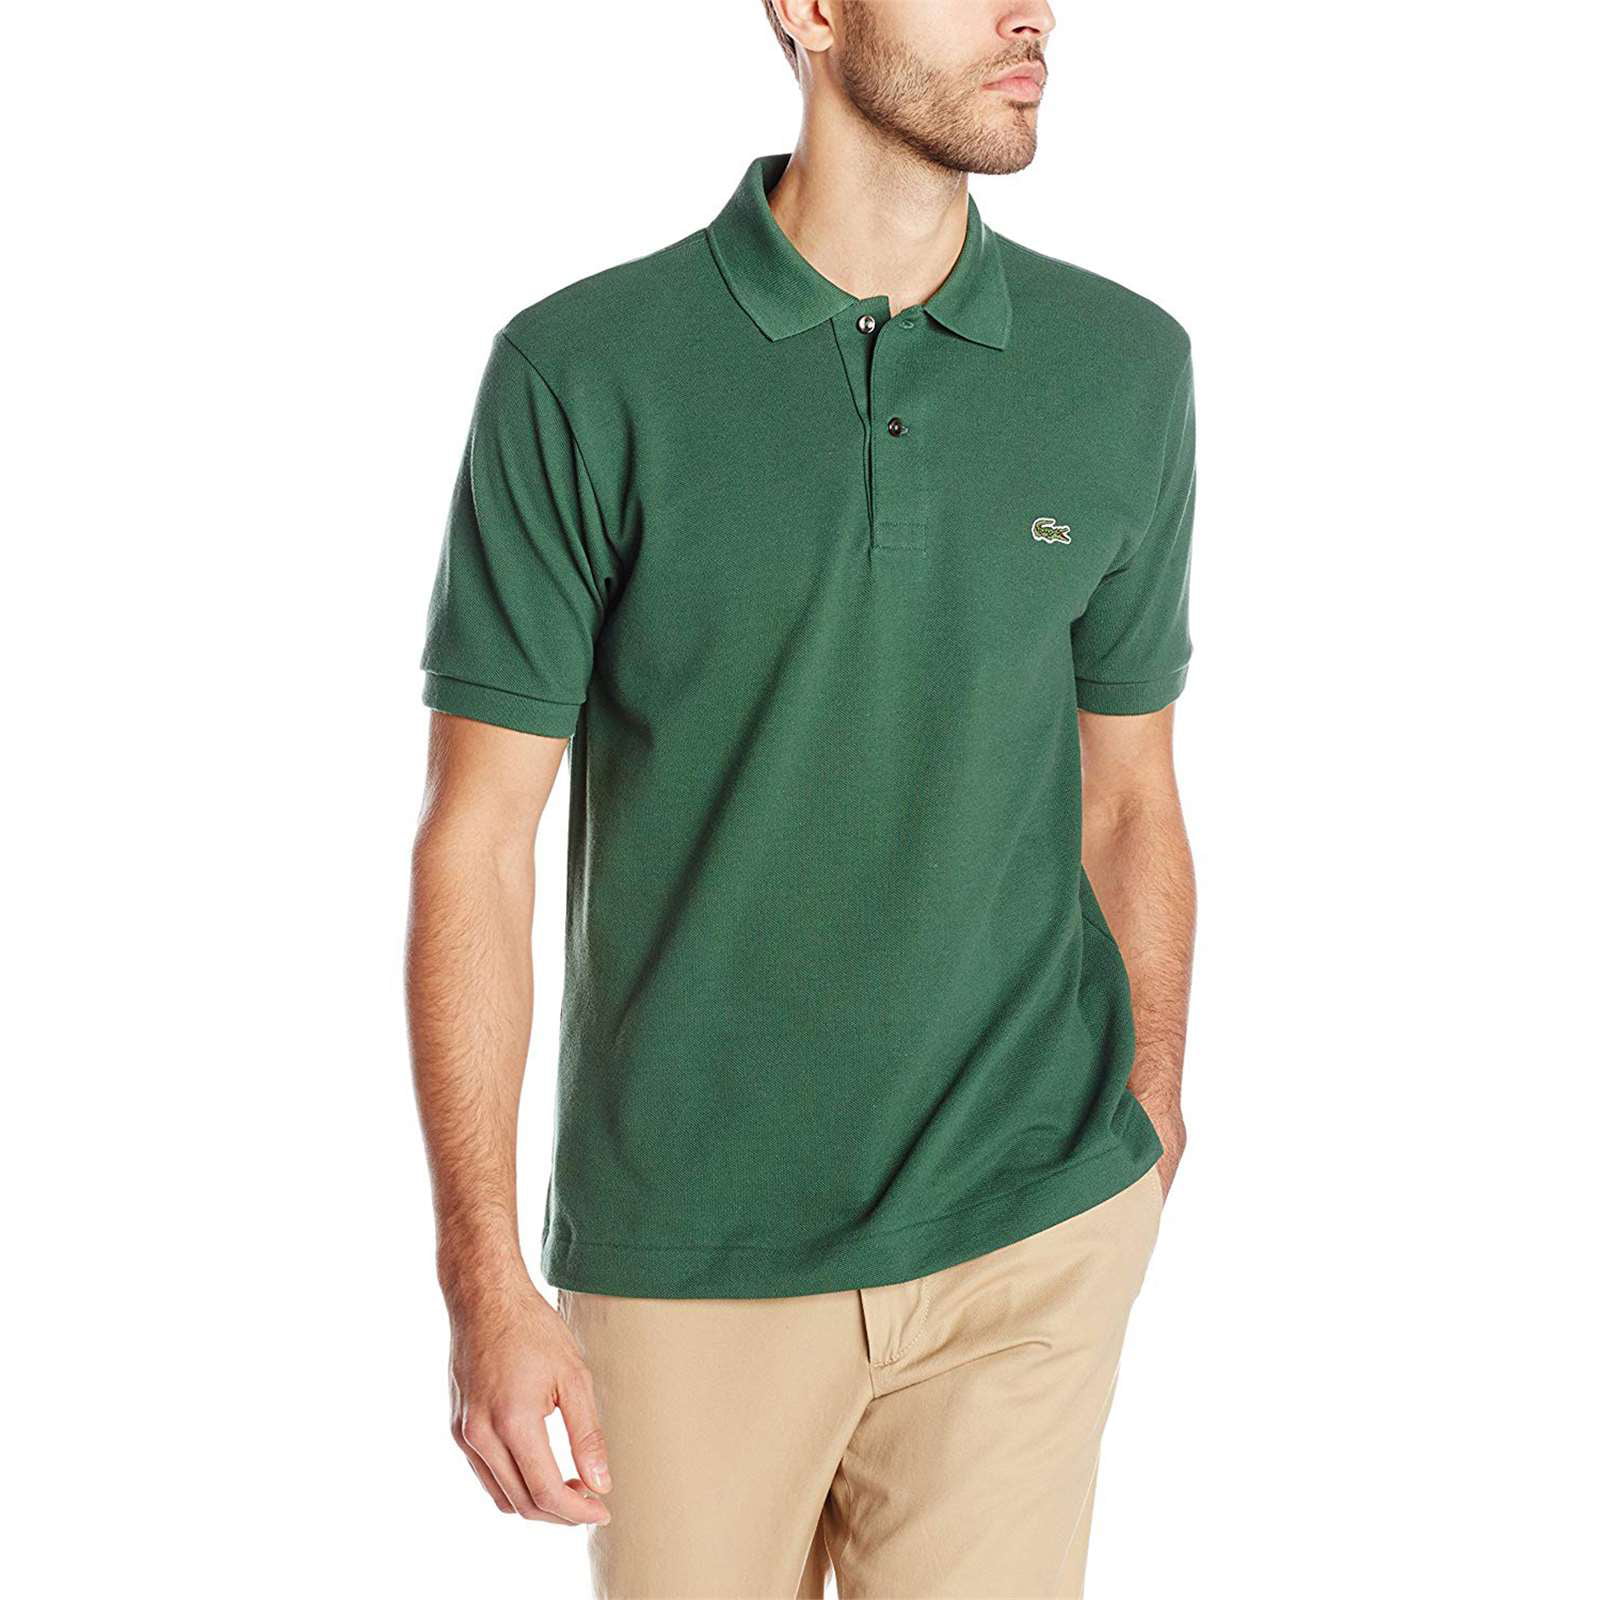 Lacoste Mens Short Sleeve Garment Dyed Vintage Polo